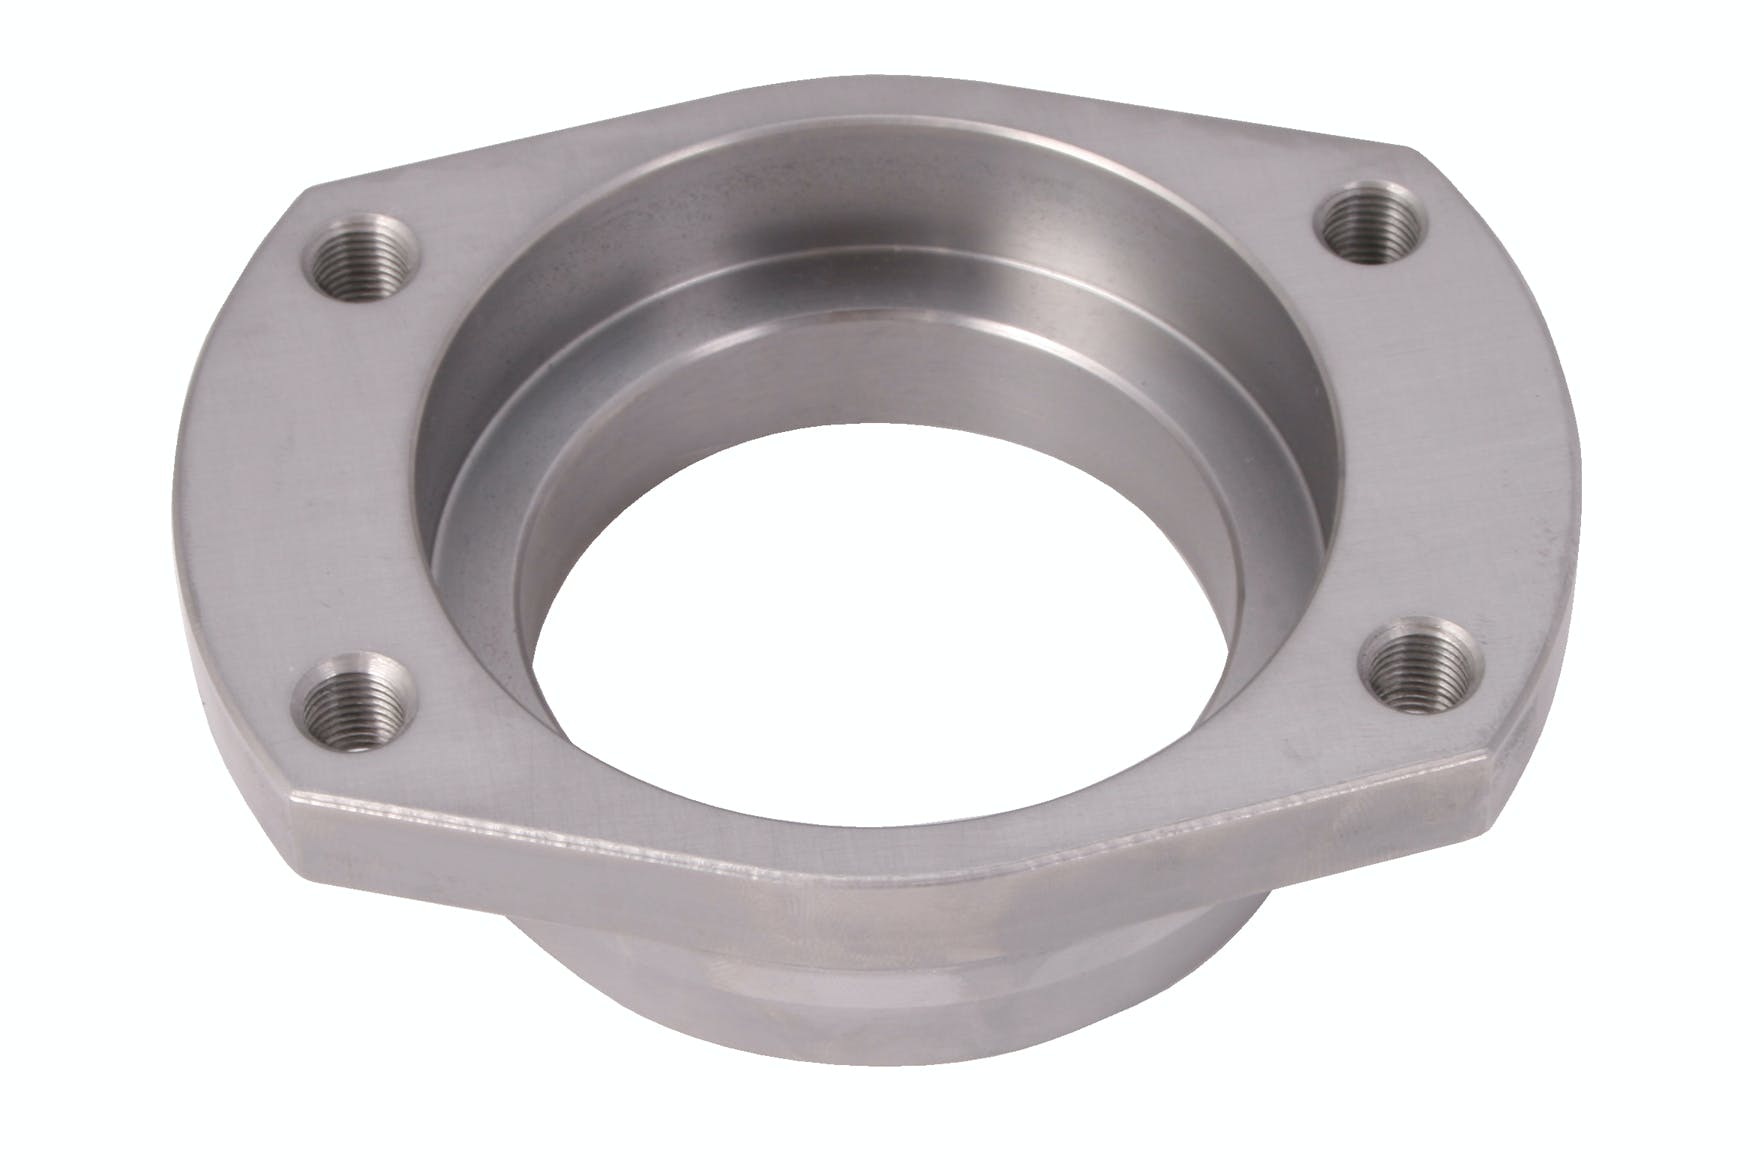 Competition Engineering C9507 Axle Housing Ends, Big Ford Axle Housing Ends